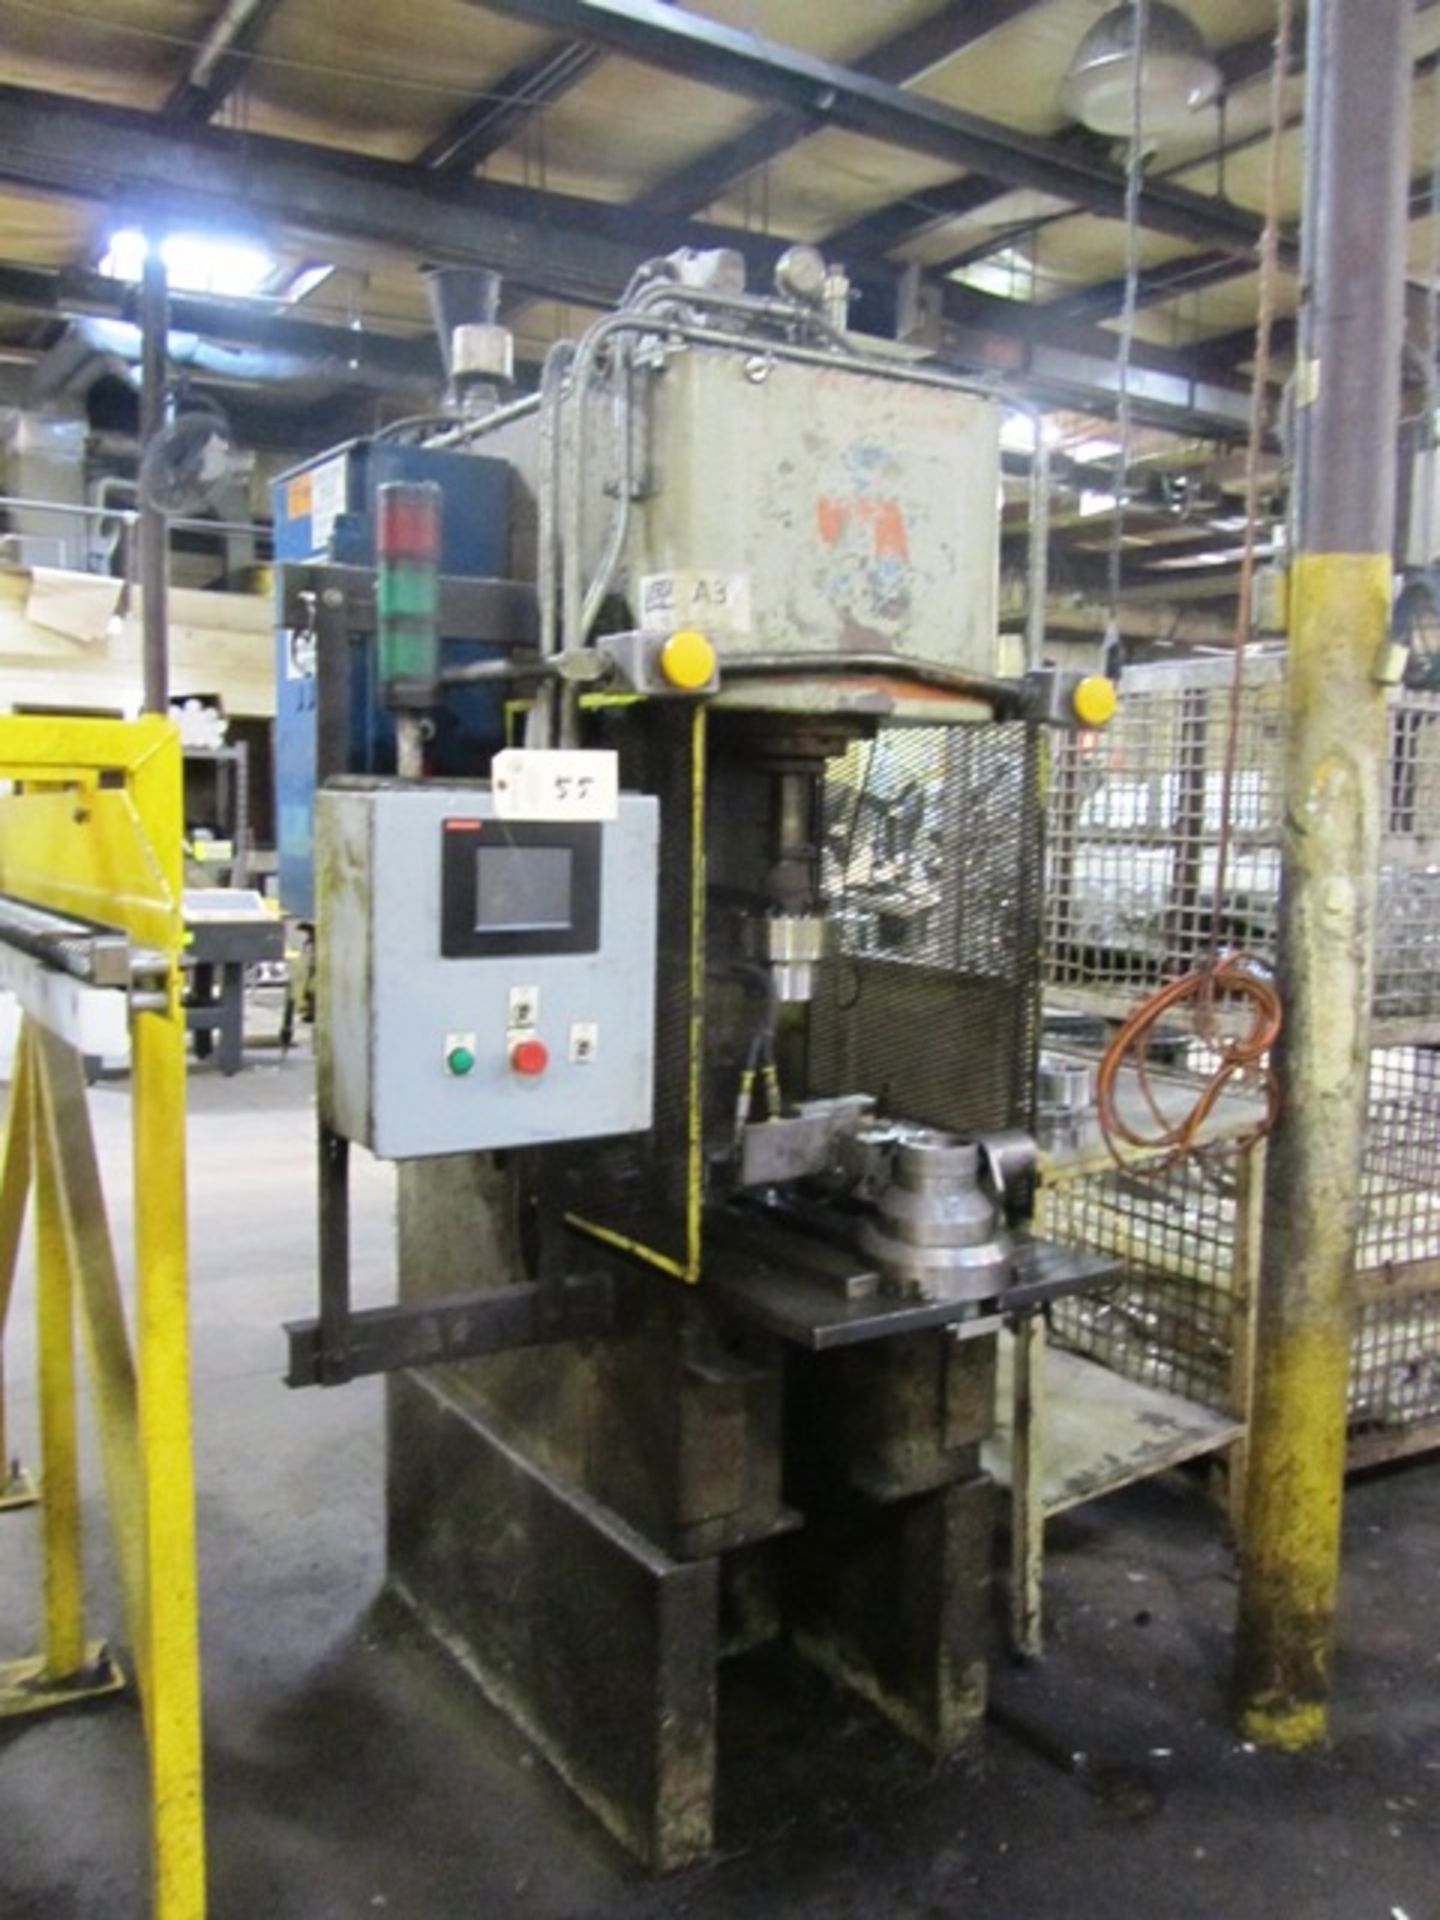 Dennison Model GC01C64D36S06 Approx 20 Ton Hydraulic Press - Image 3 of 3